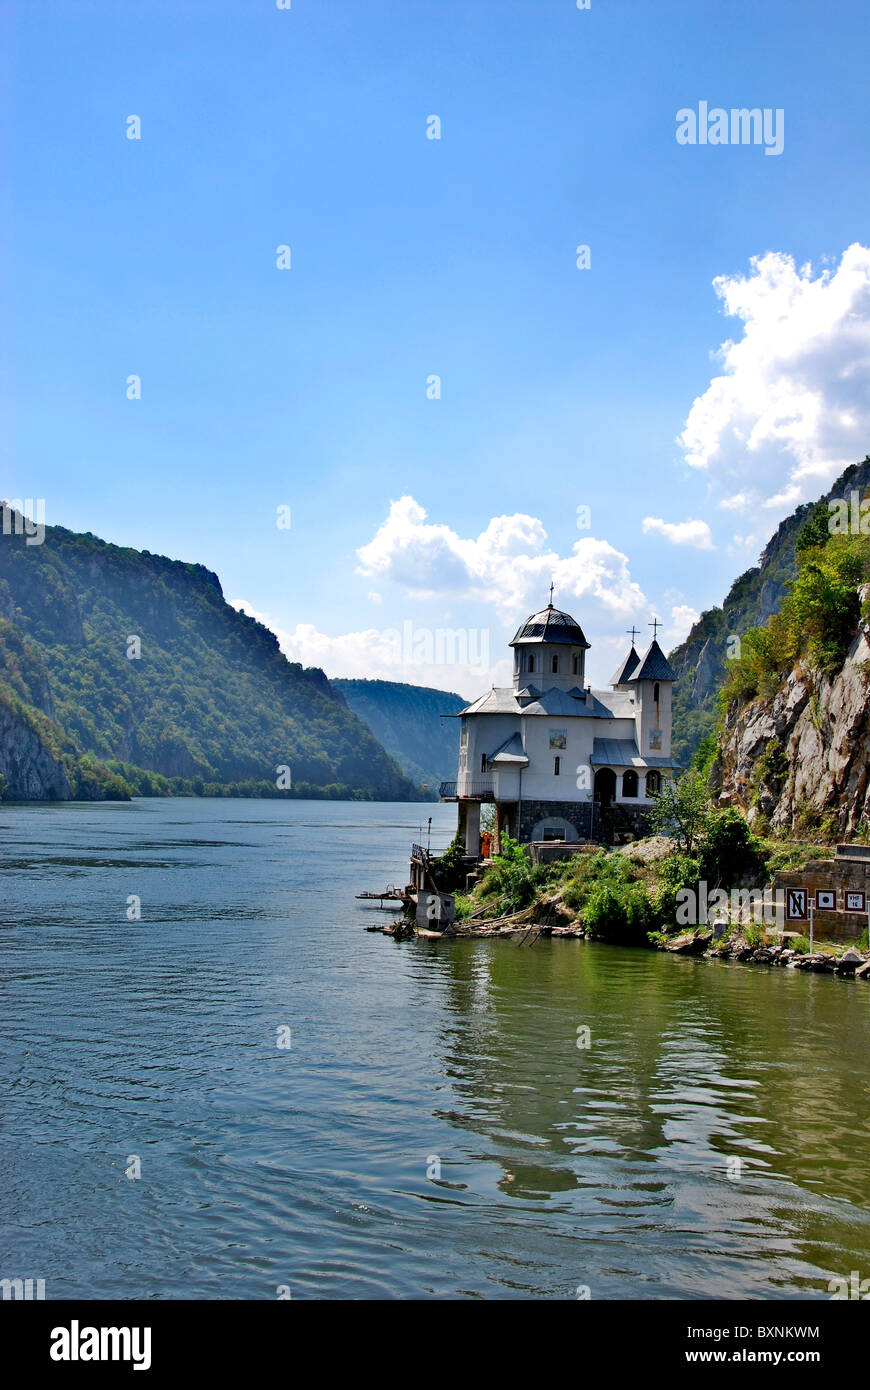 The Monastery Mraconia in the Little Cazan Gorge on the Danube River in the Iron Gate (founded 1453) Stock Photo